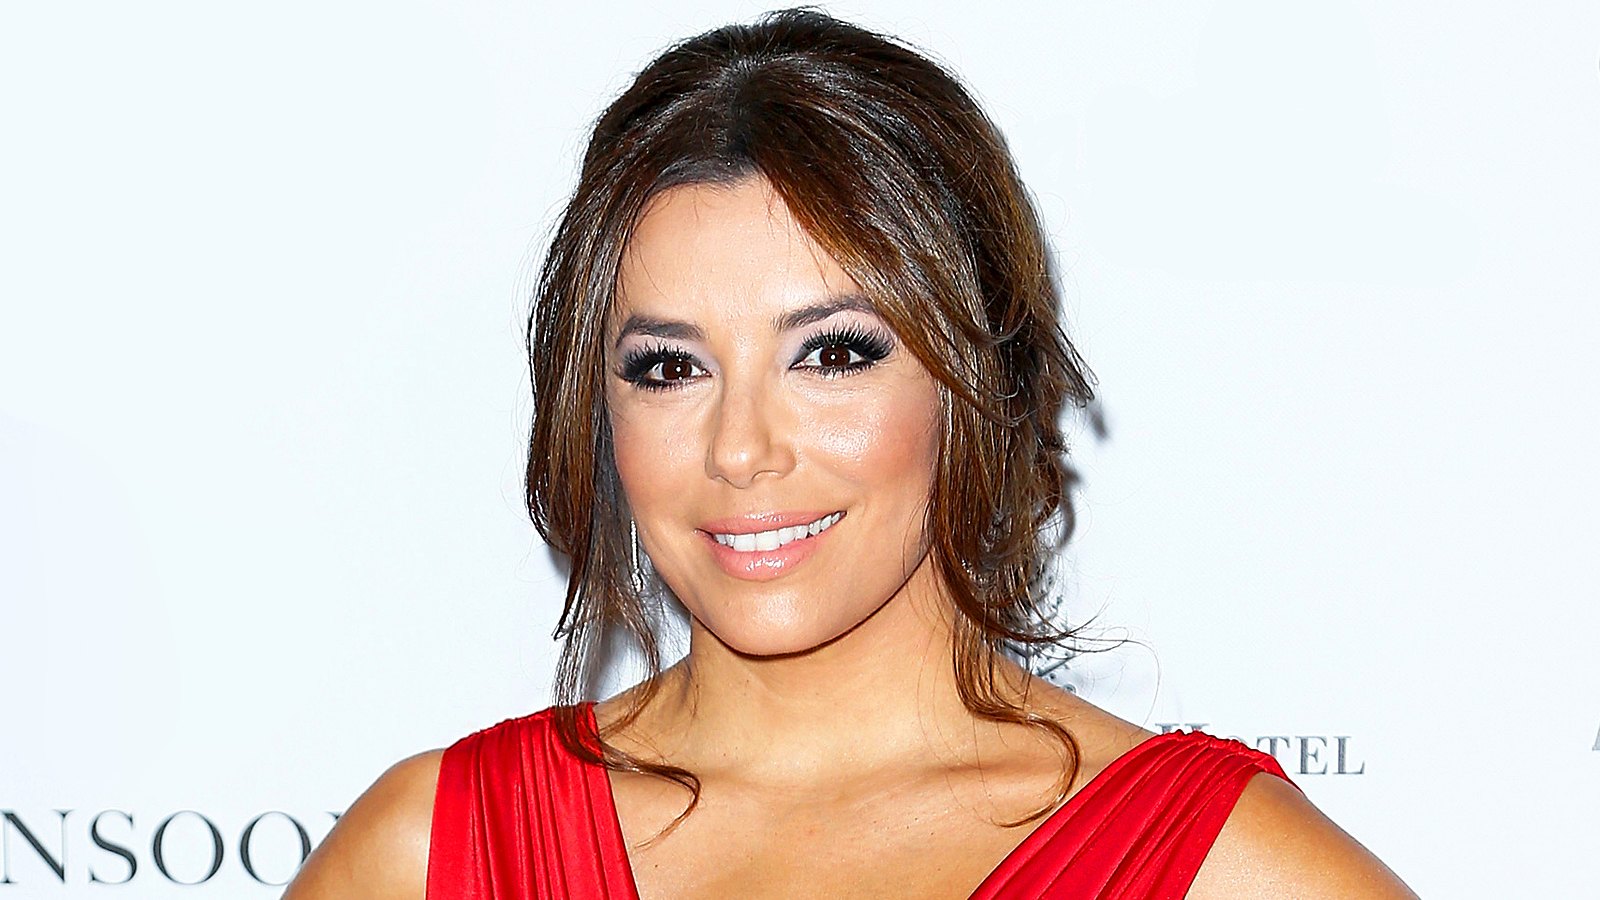 Eva Longoria attends the Global Gift Gala at Four Seasons Hotel George V in Paris, France.